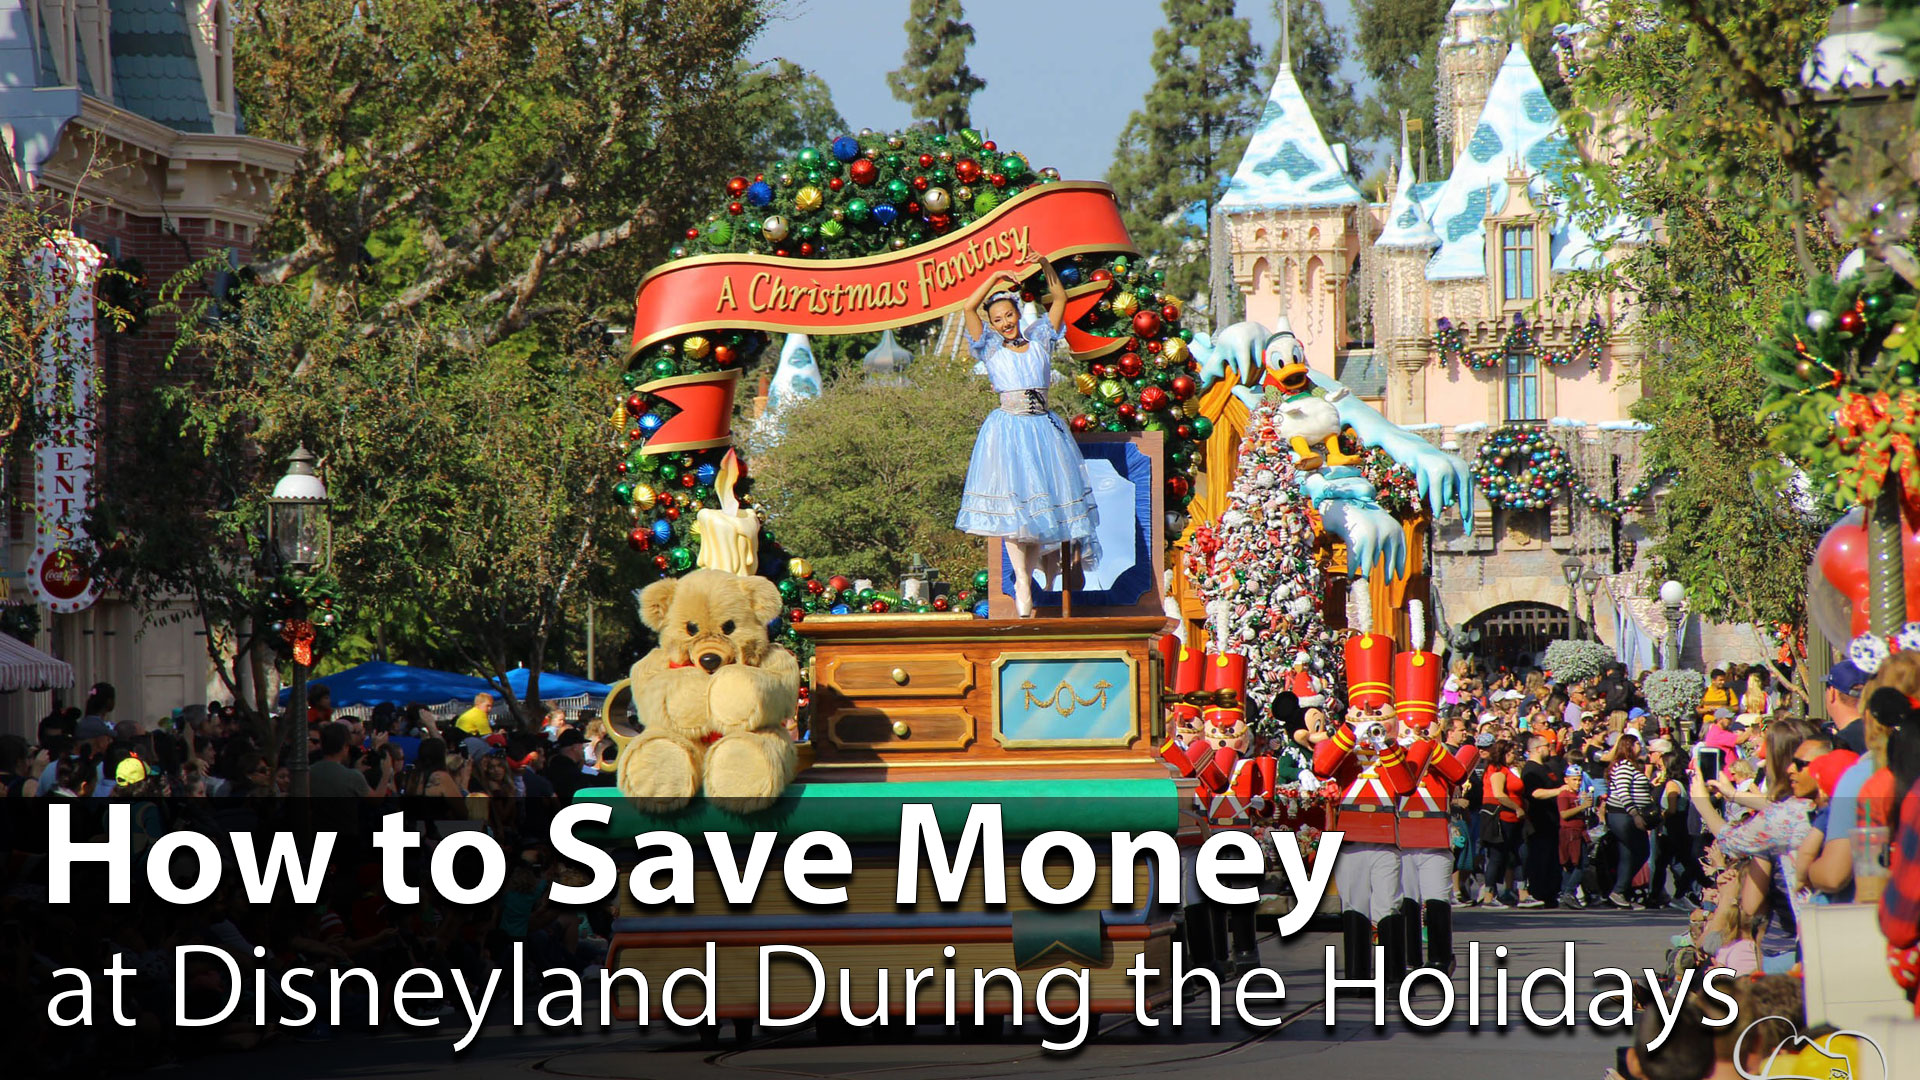 How to Save Money at the Disneyland Resort During the Holiday Season